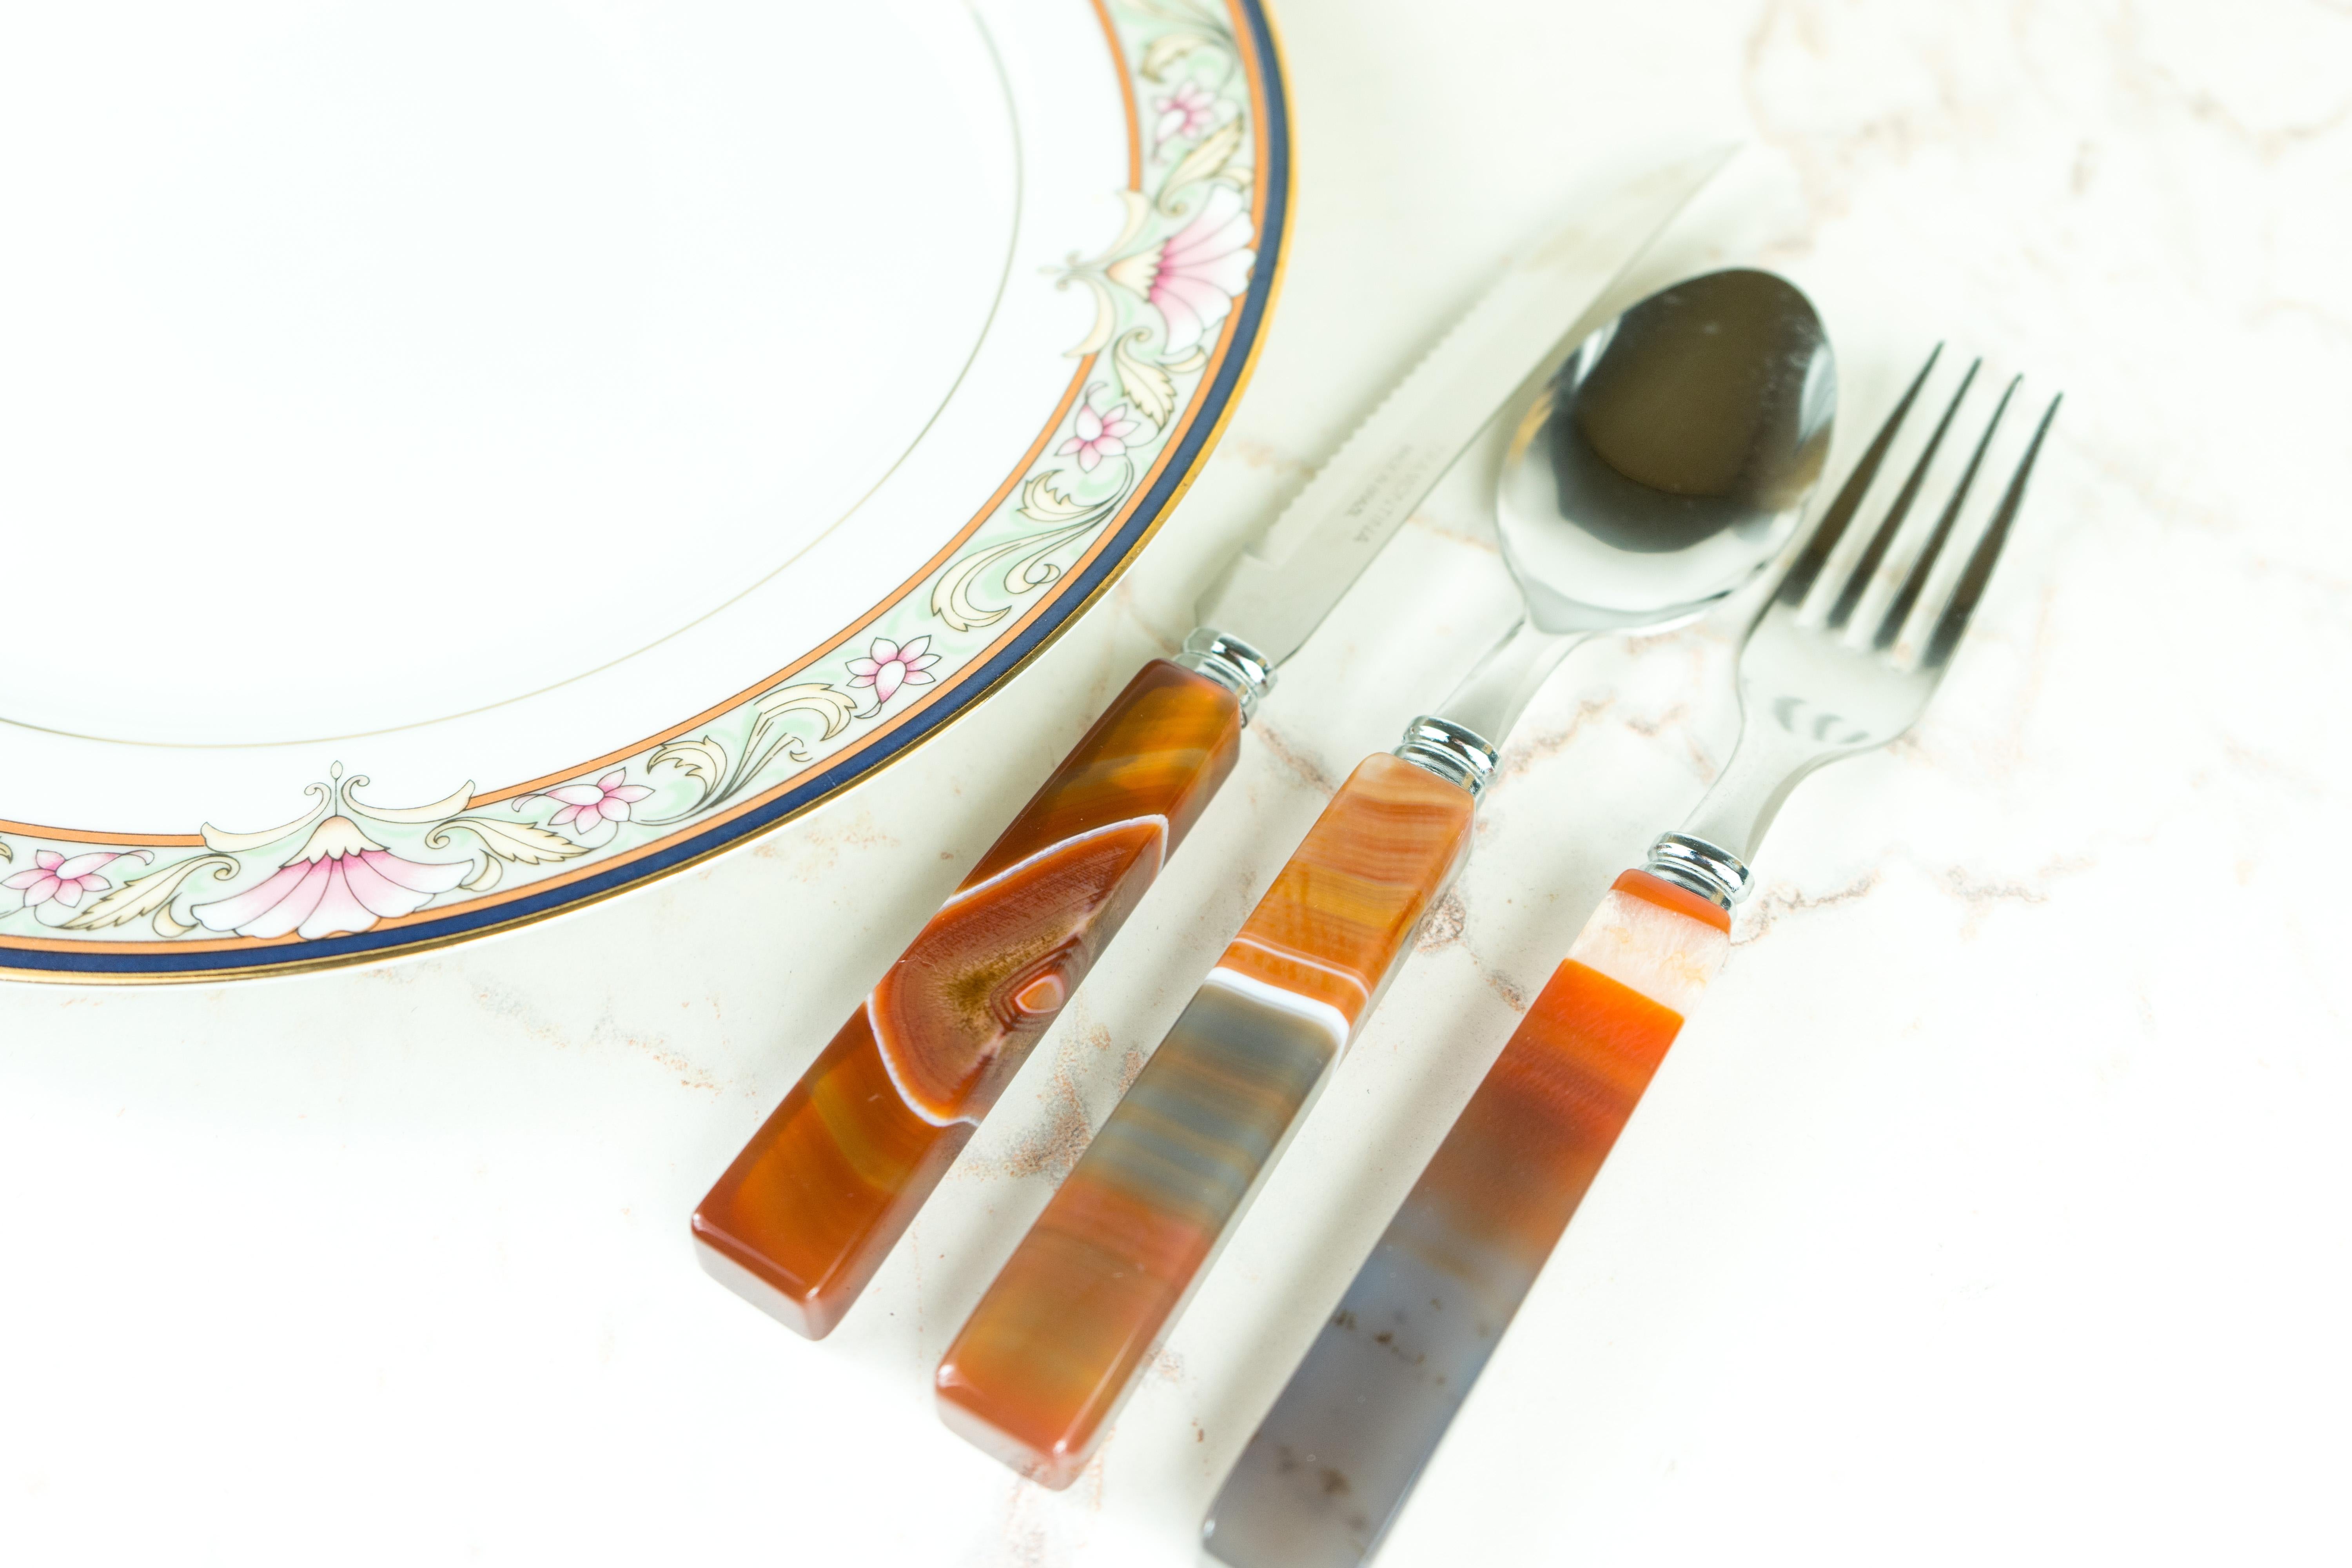 Handmade Red Lace Agate with Stainless Steel Cutlery Tableware Set, Serves 6 For Sale 6